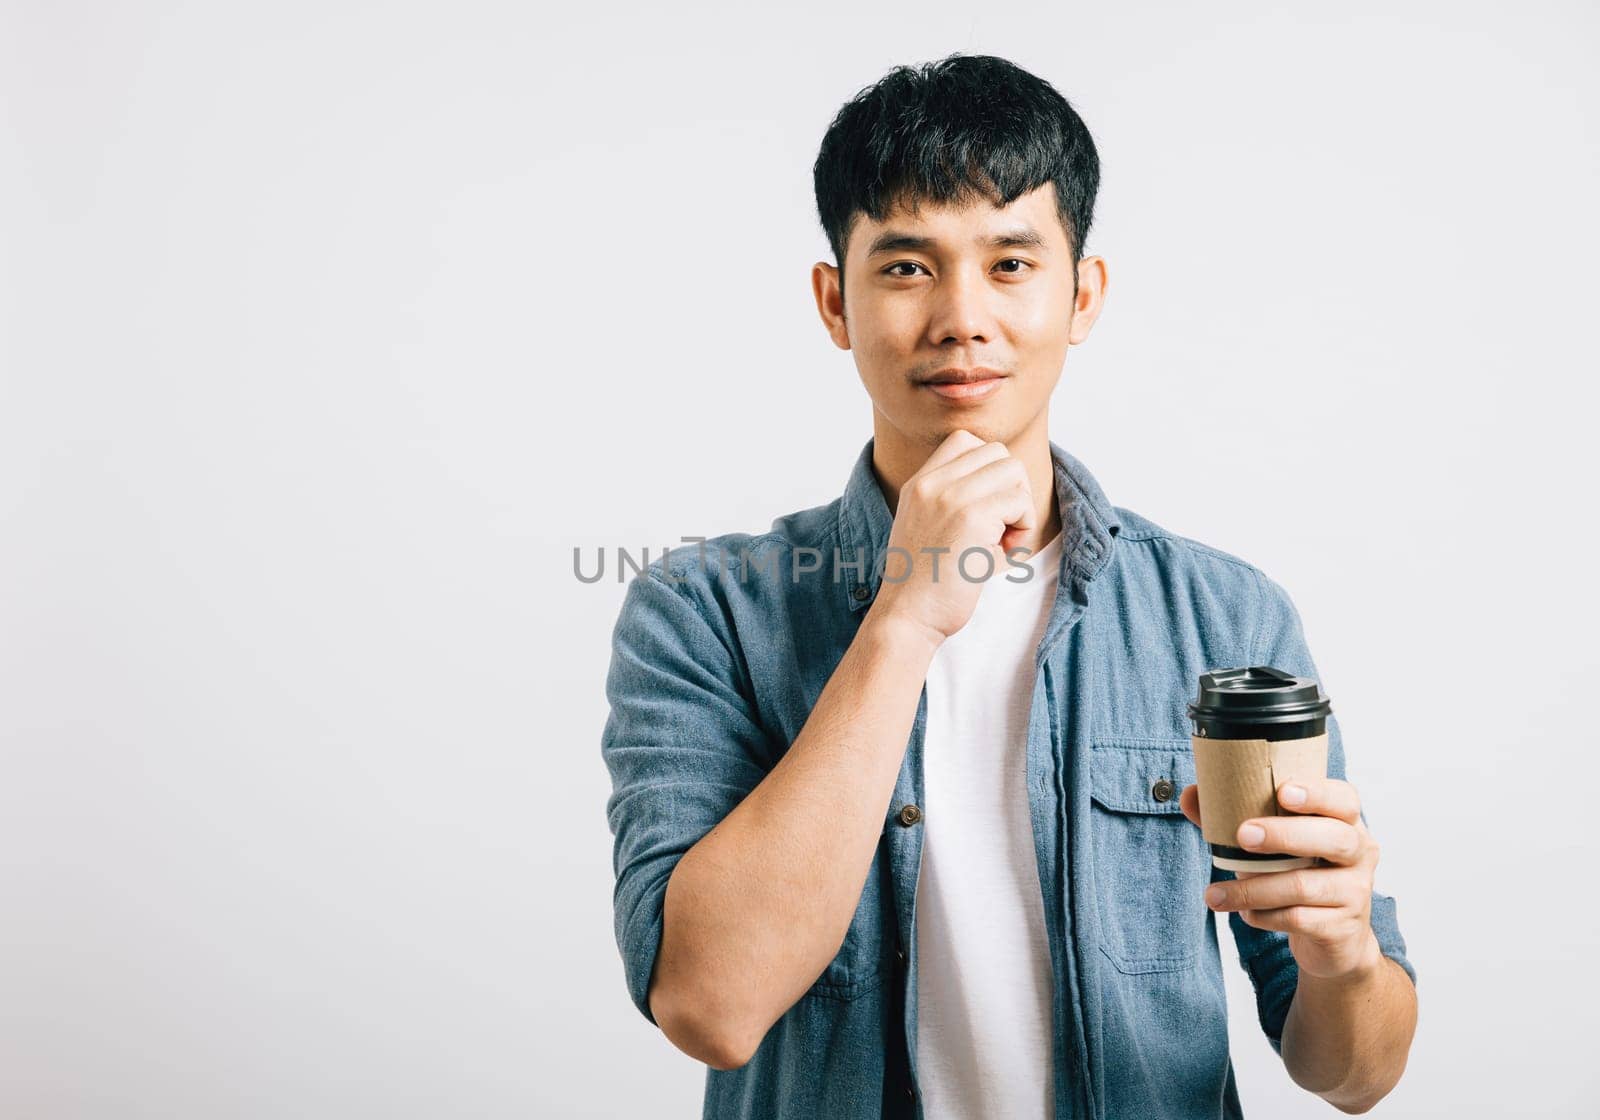 Smiling Thai man with take-away coffee cup in hand by Sorapop